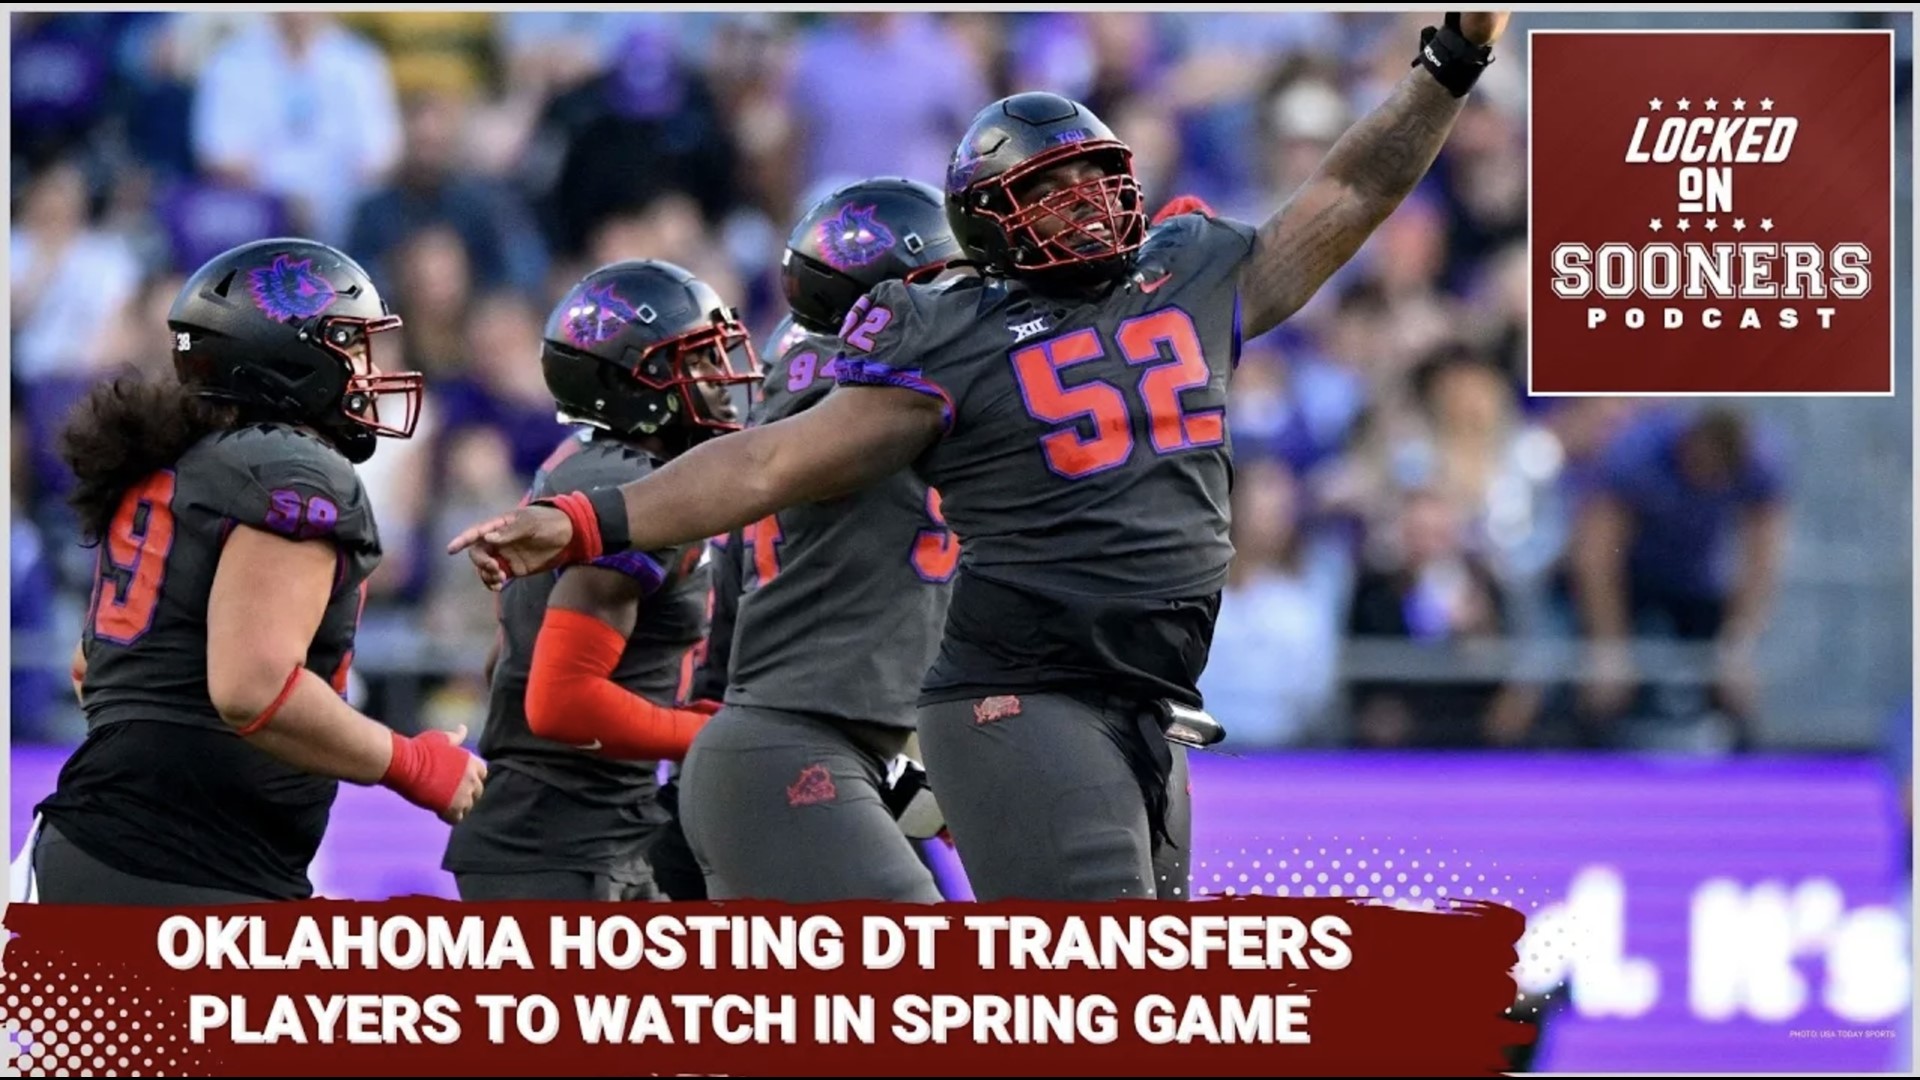 The Oklahoma Sooners are set to host a number of prospects from the high school ranks, but are also hosting defensive tackle transfers